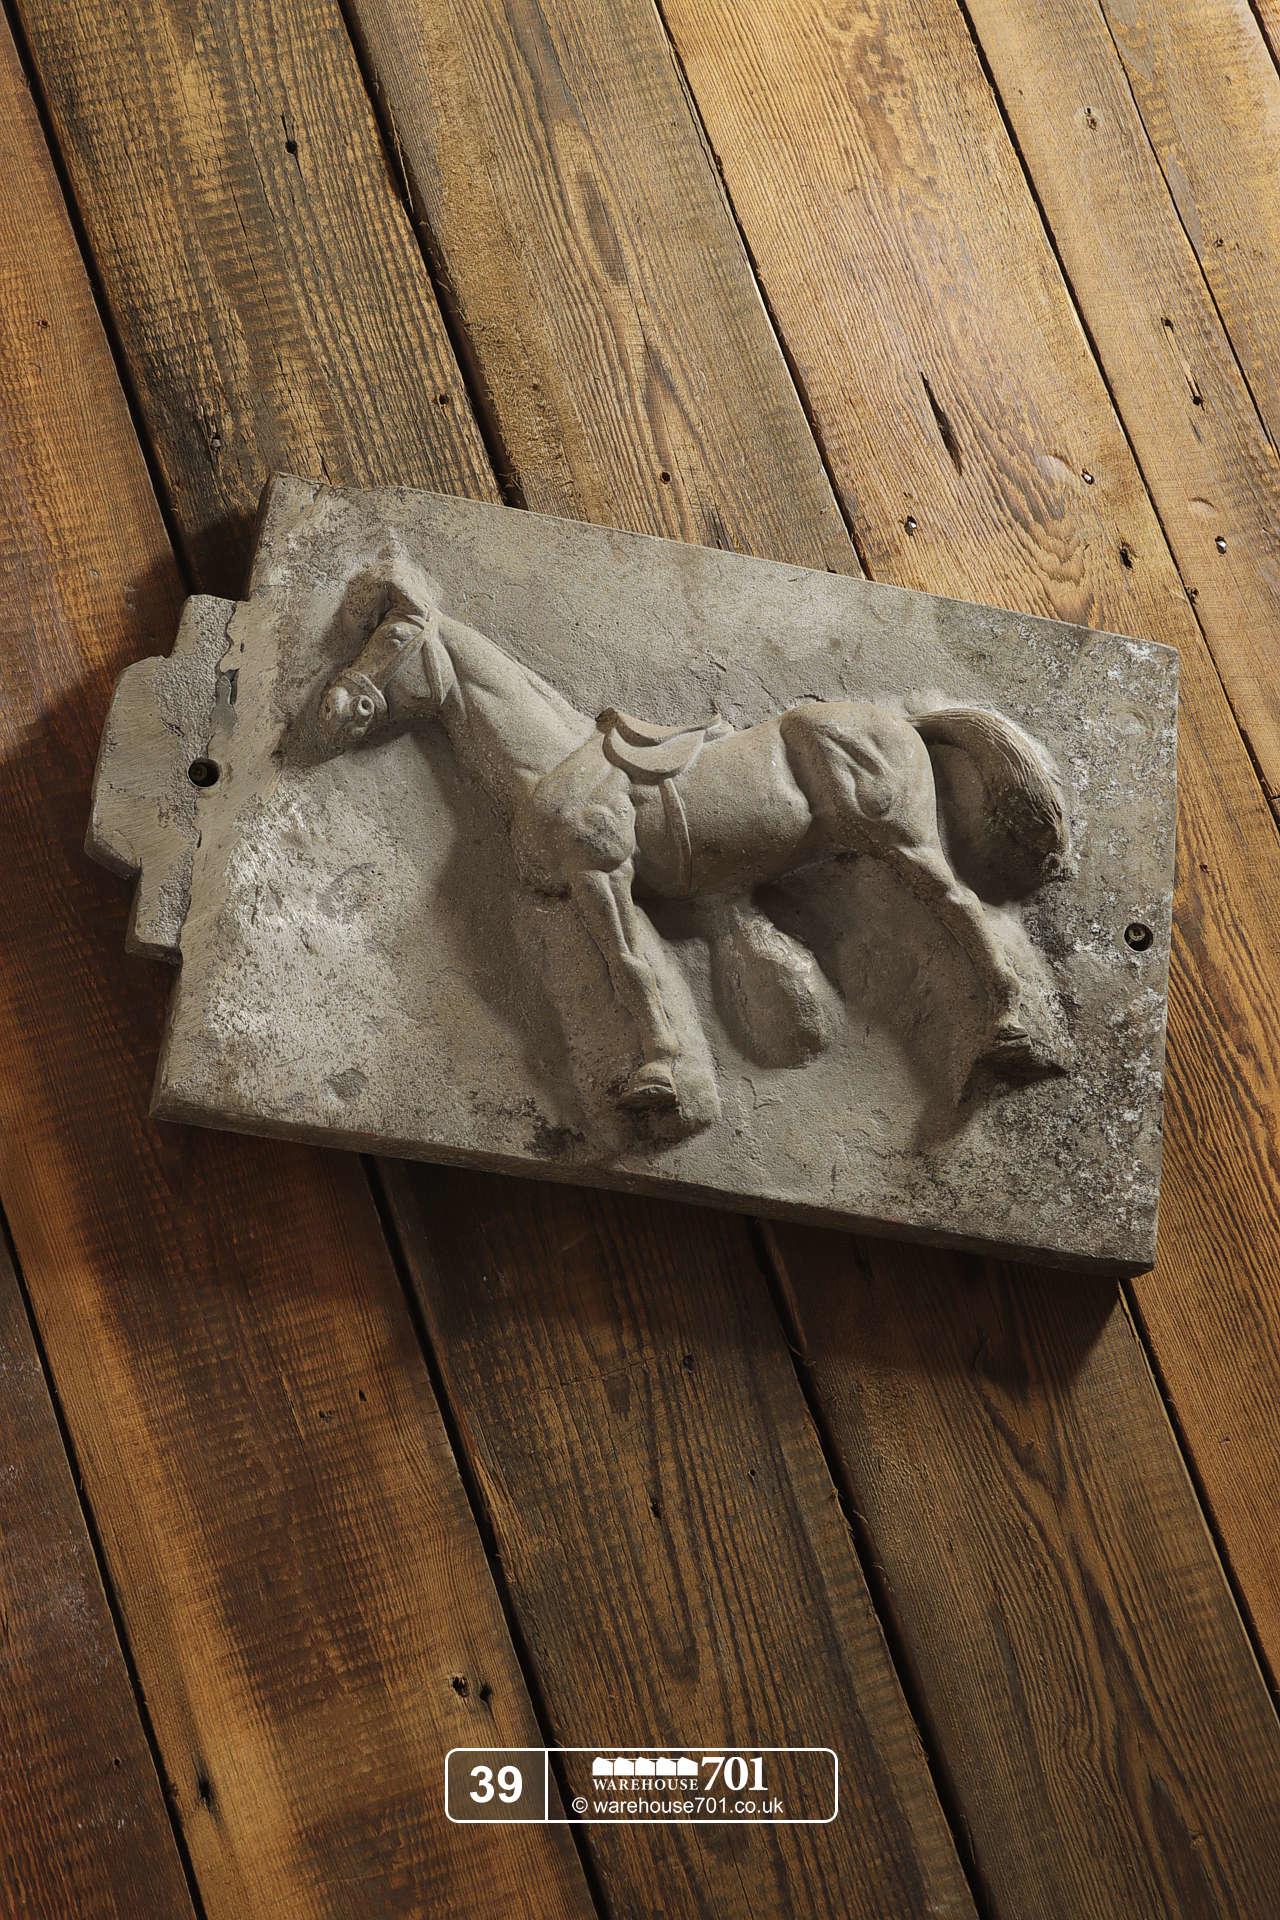 Aluminium Foundry Castings of Horses (No's 38, 39, 40, 41) for Shop, Retail and Home Display #6